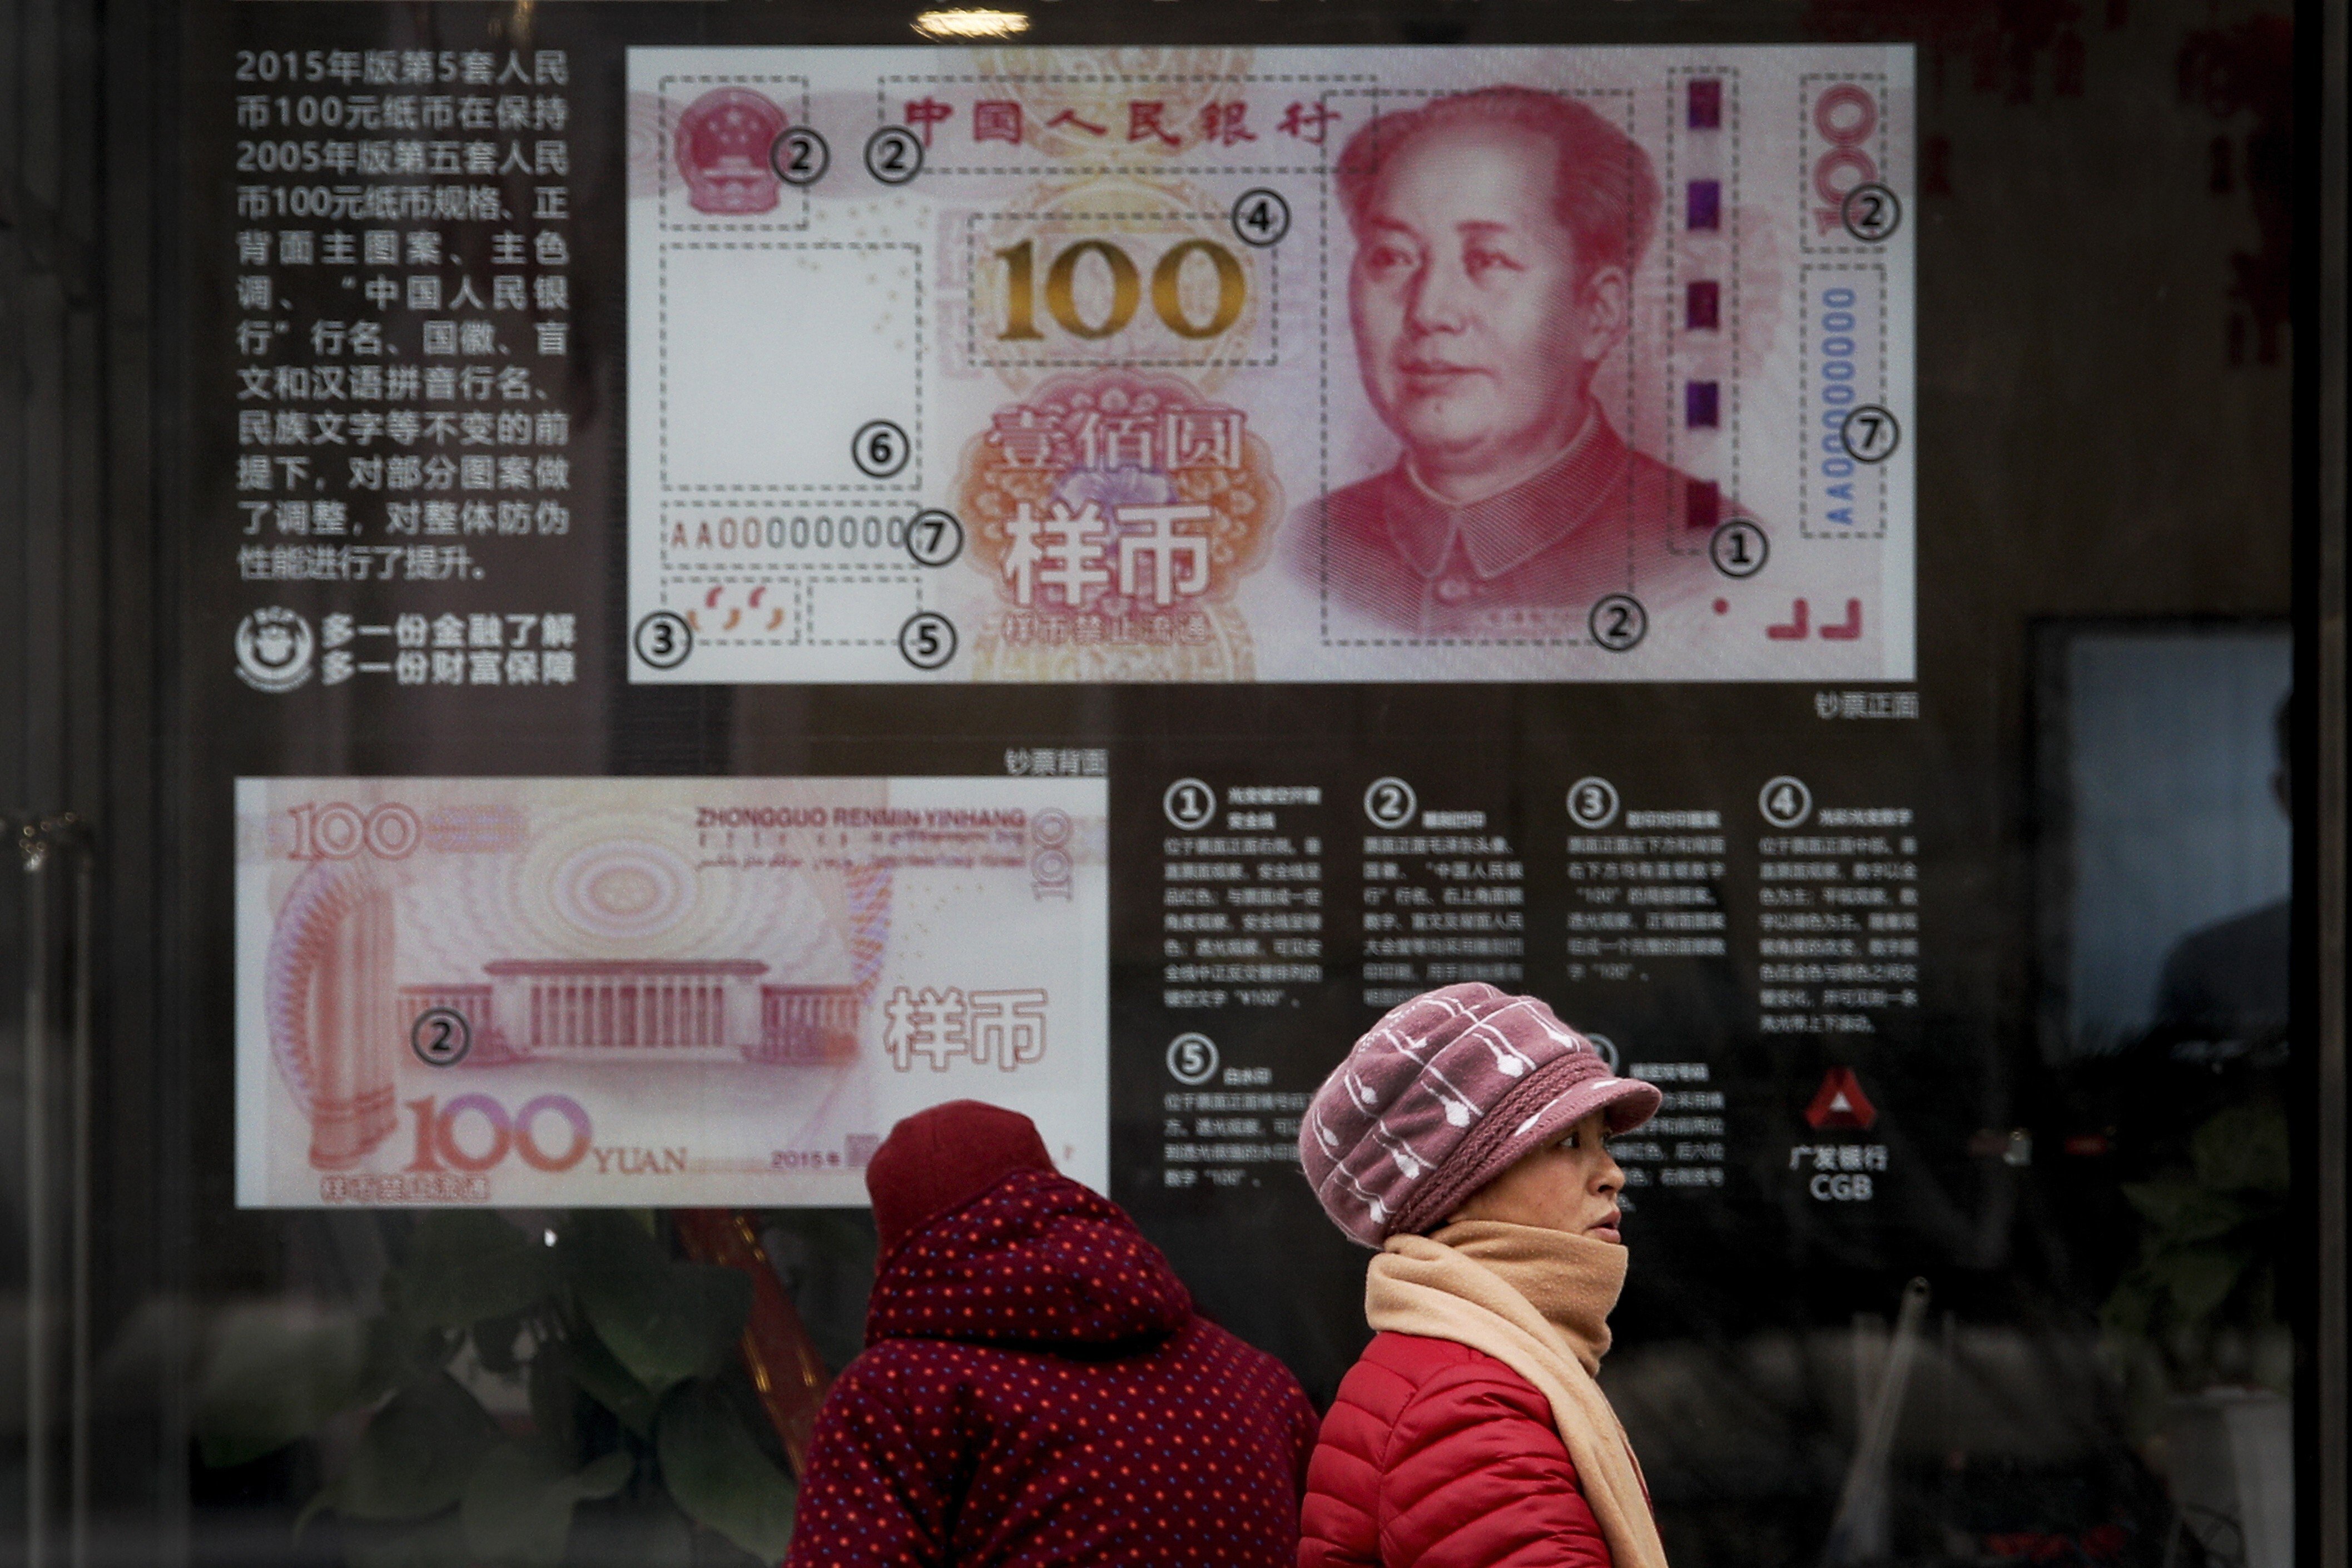 A woman walks past a bank window panel displaying the security markers on the latest 100 yuan notes in Beijing on February 18, 2019. Photo: AP